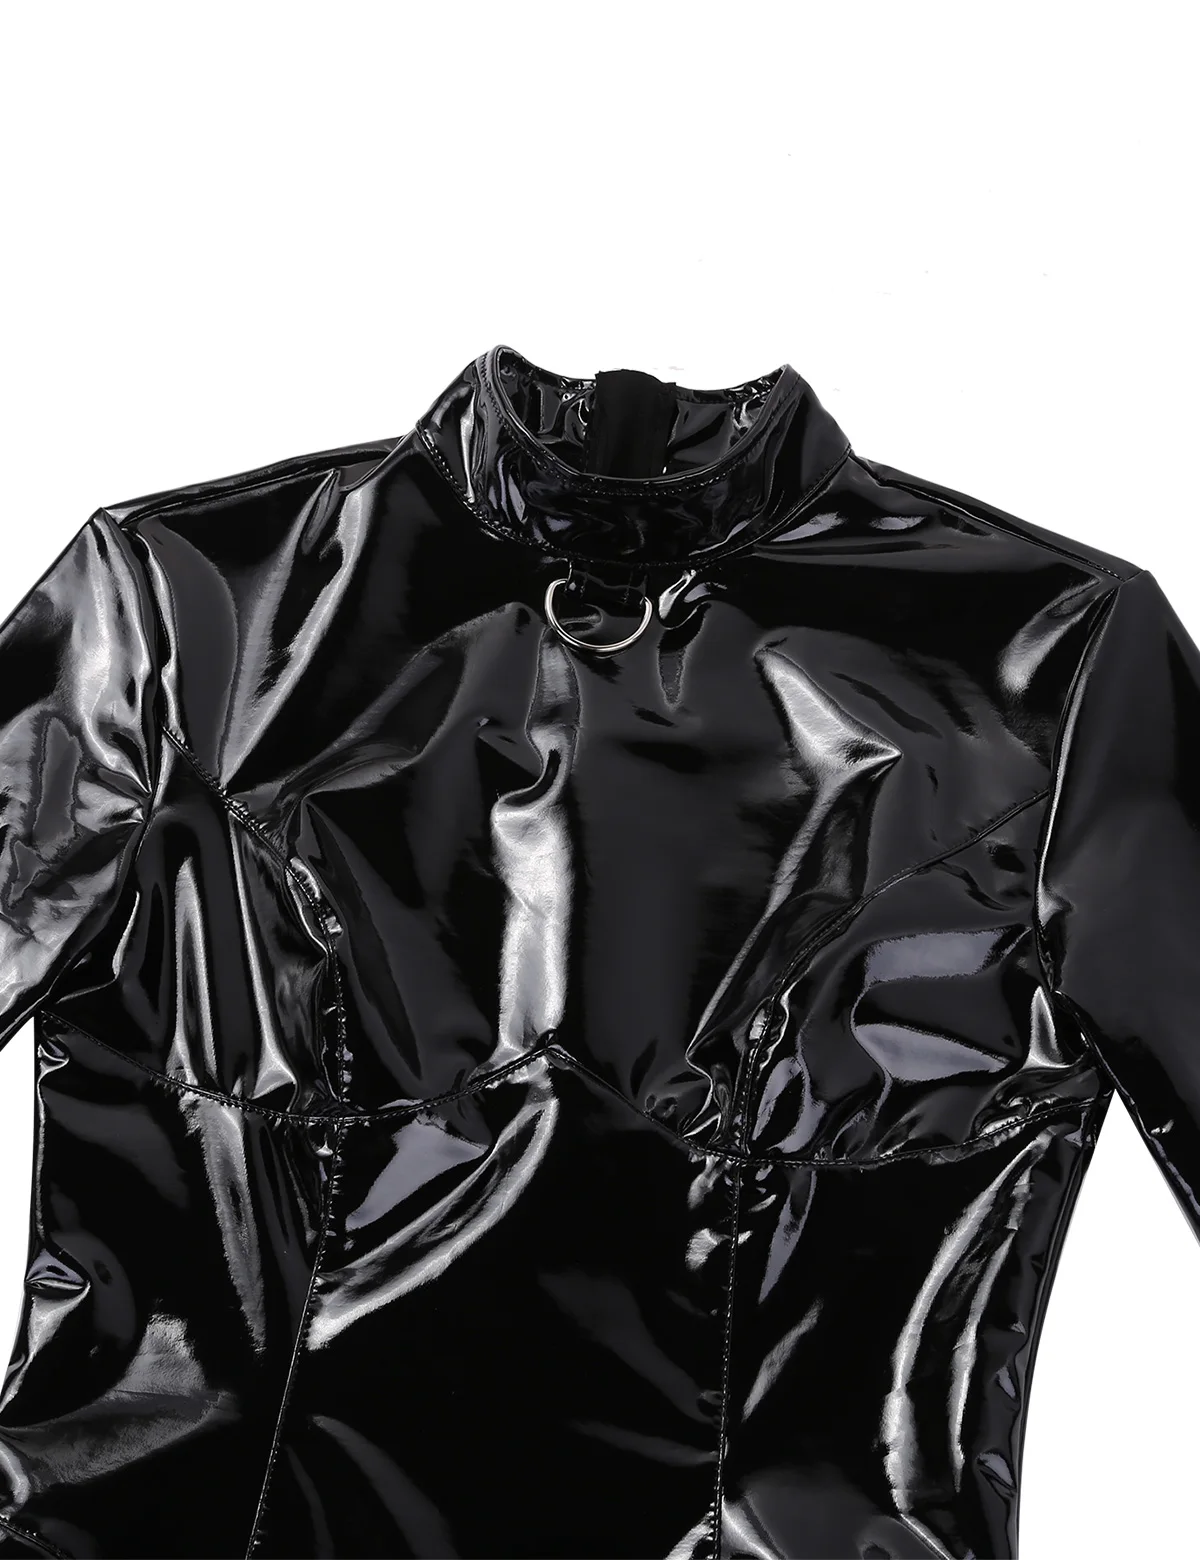 CHICTRY Womens Shiny PVC Leather Bodysuit Long Sleeve Front Zipper